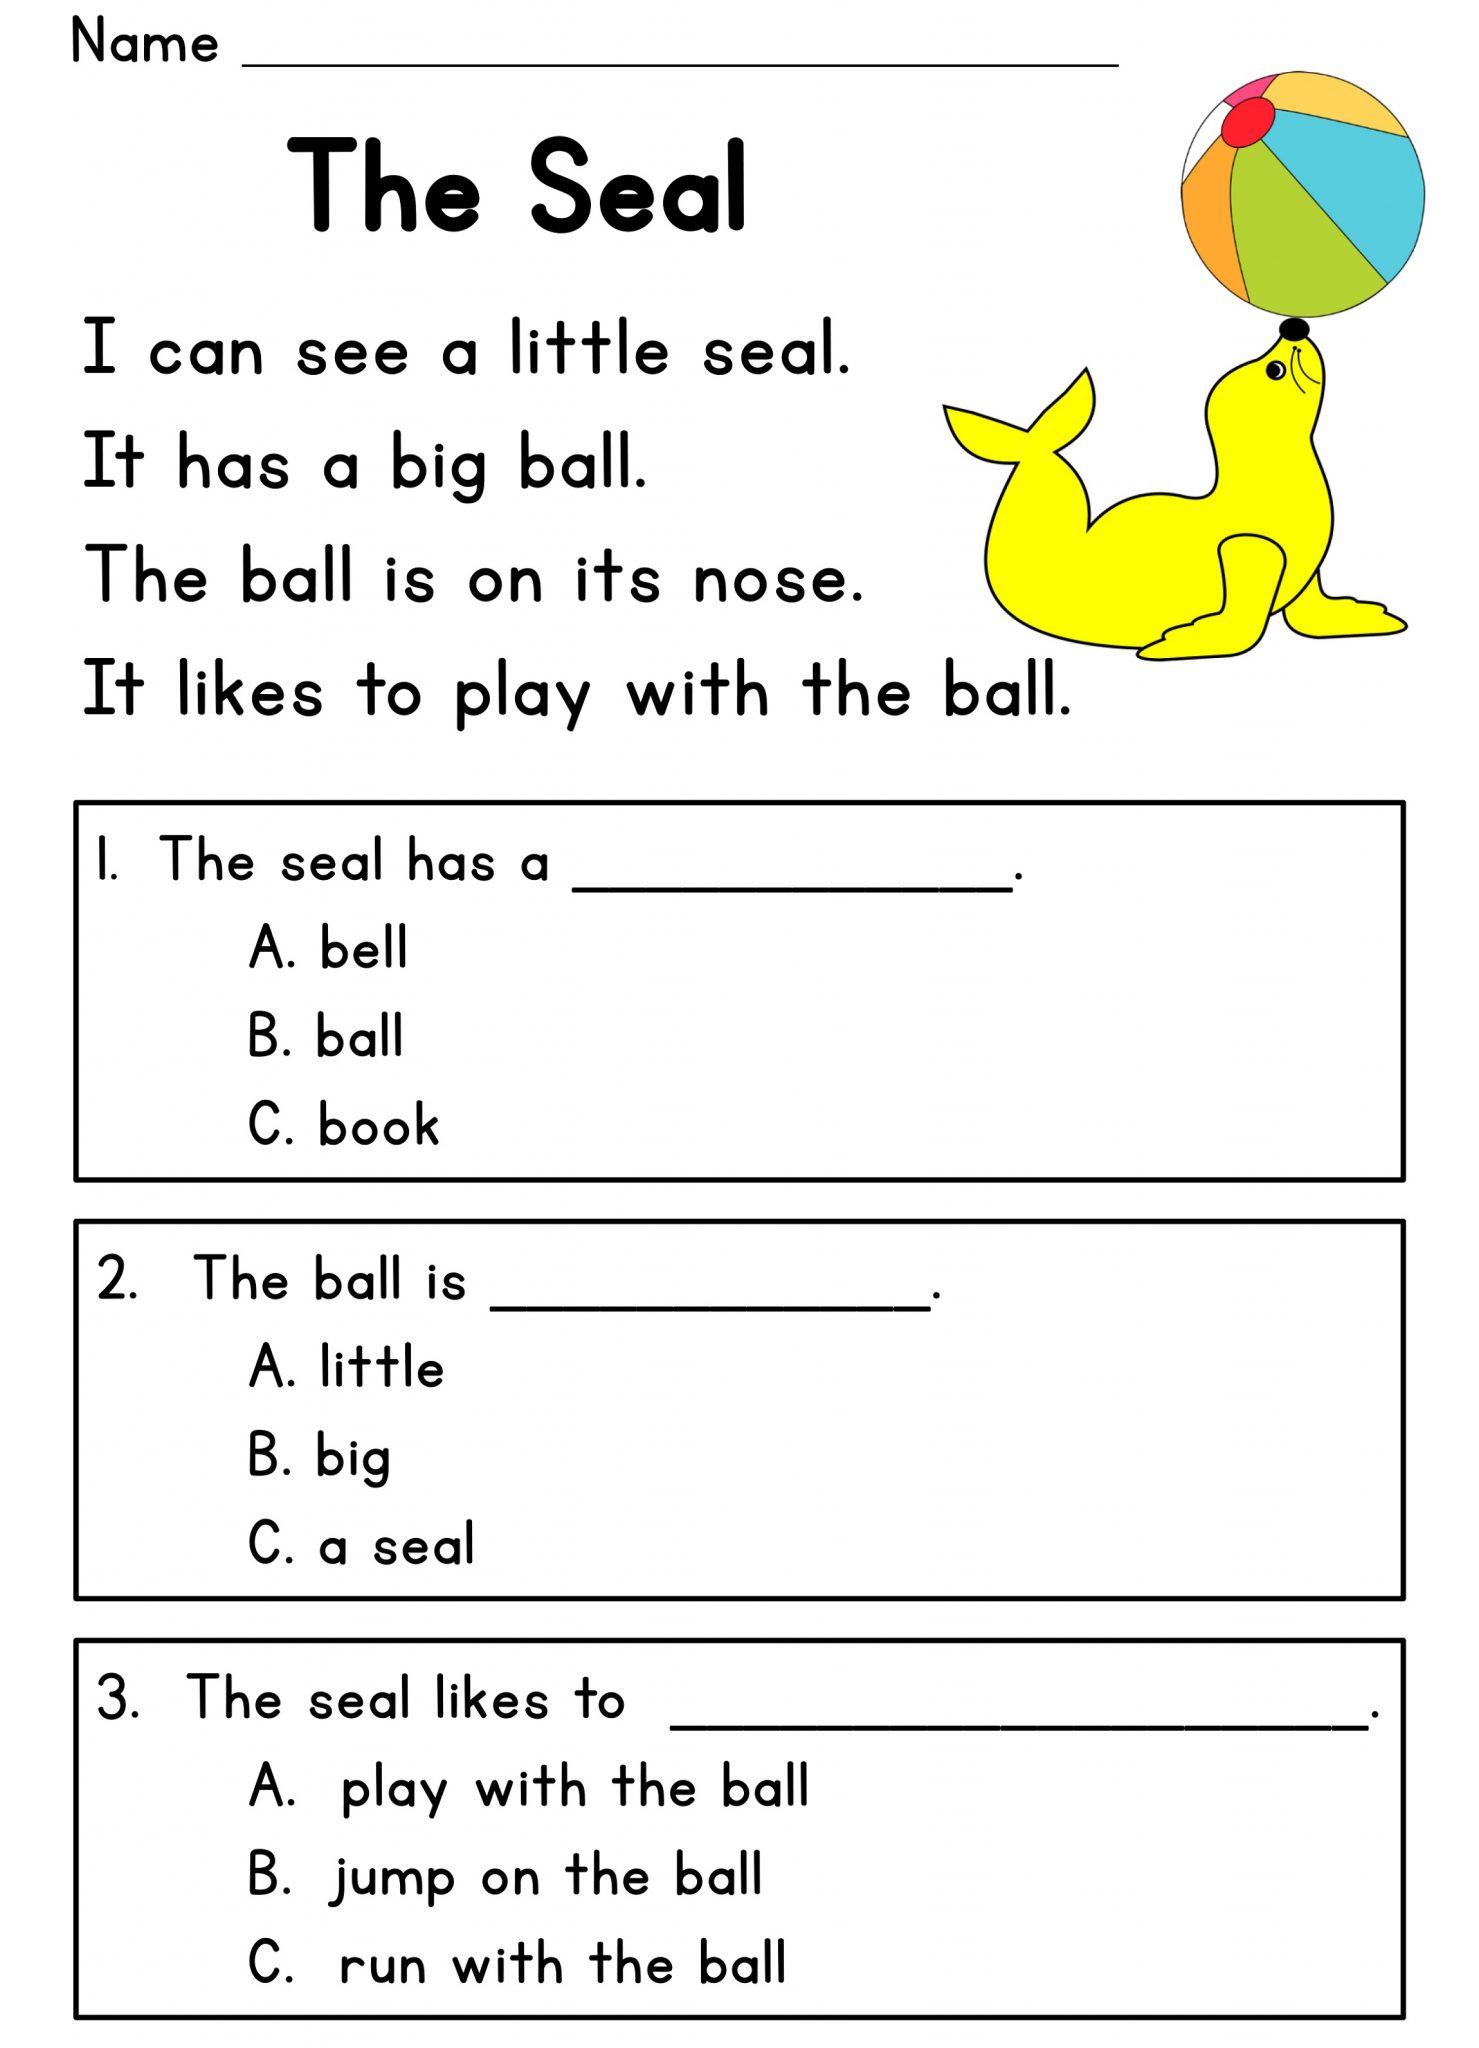 Free Printable Worksheets For 5 Year Olds Educative Printable